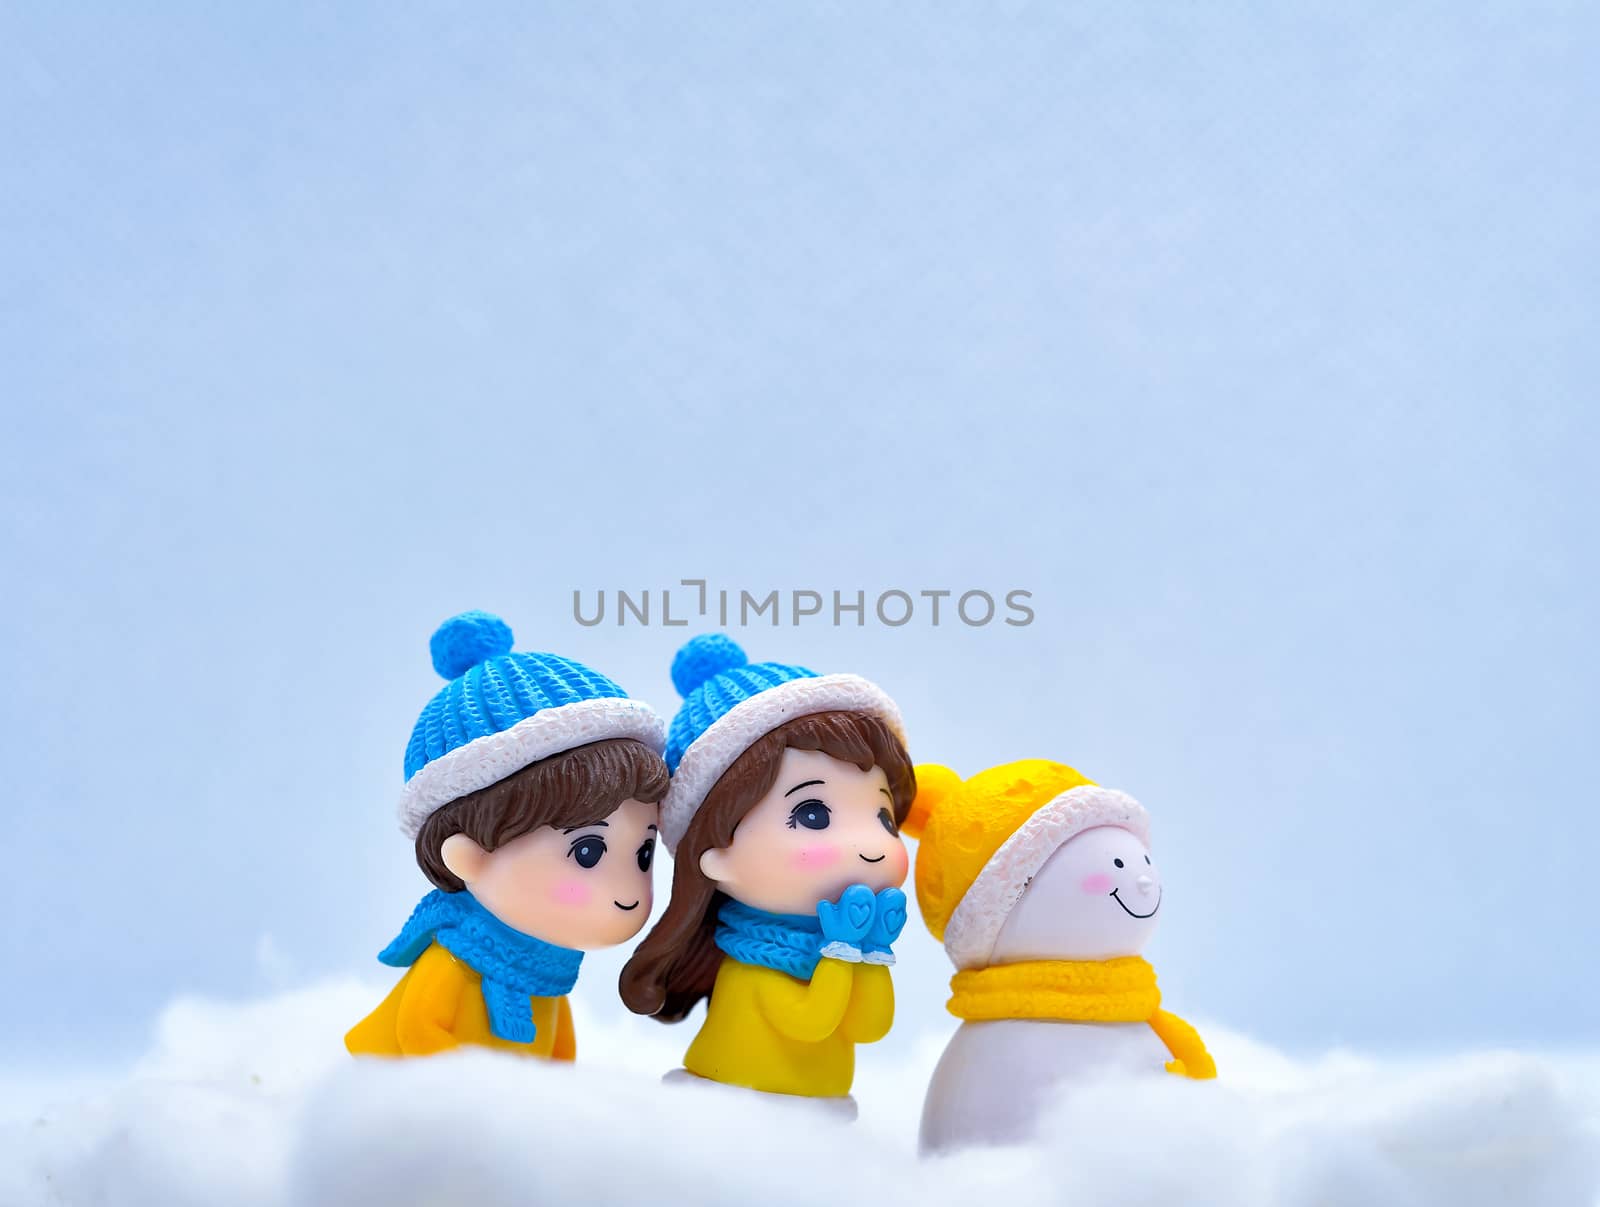 Tourism and travel concept: Miniature people looking for something in winter snow along with little snowman by rkbalaji